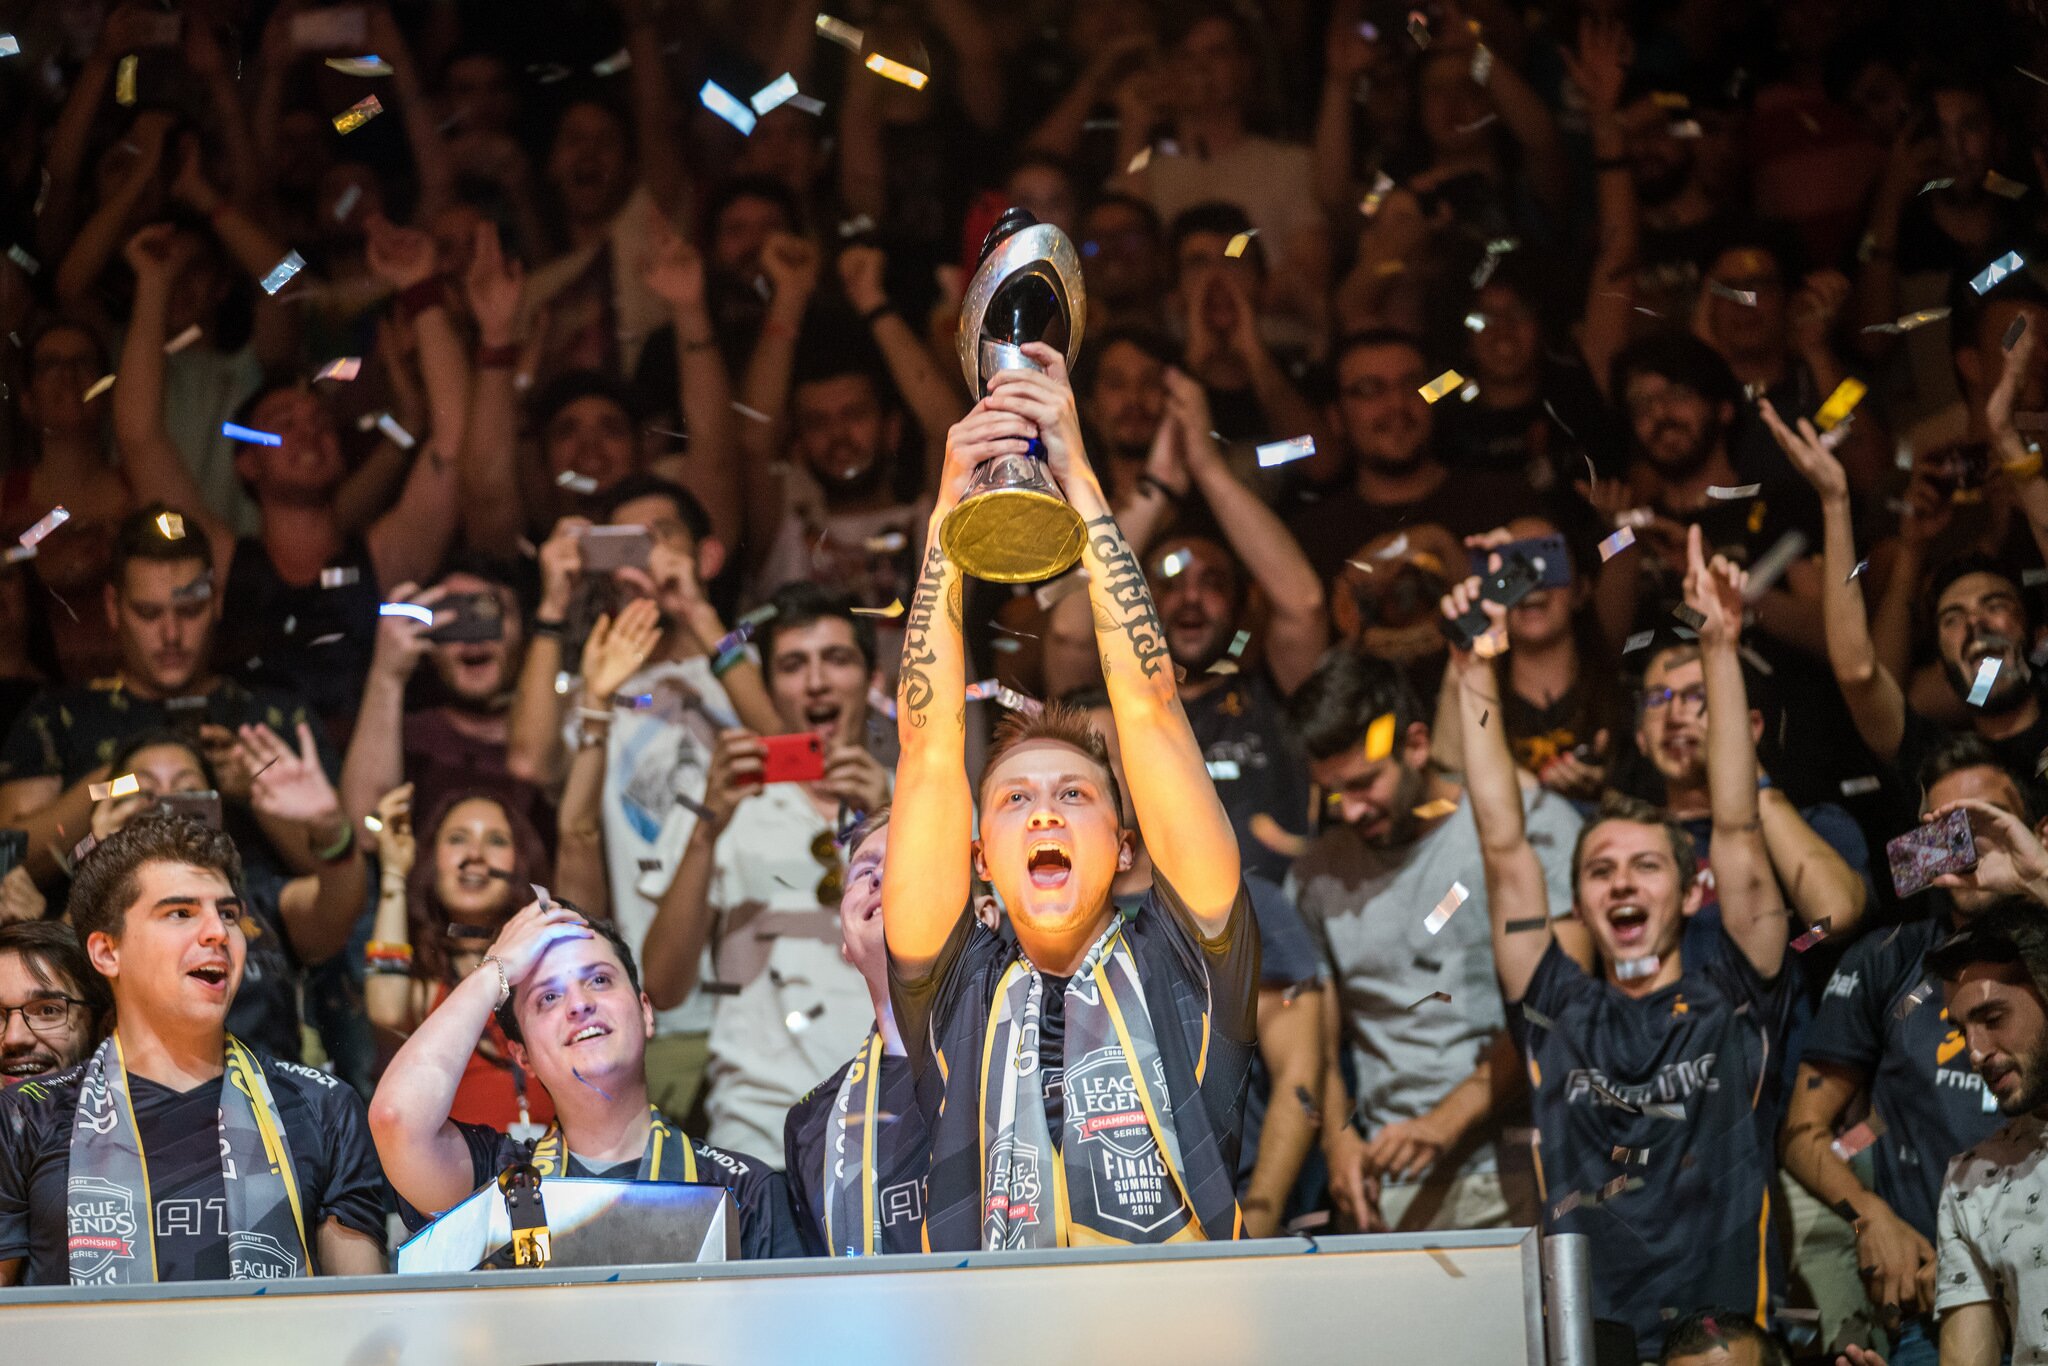 Fnatic celebrates after winning the EU LCS Summer Split, defeating Schalke 04 3-1 (Photo courtesy of Riot Games)